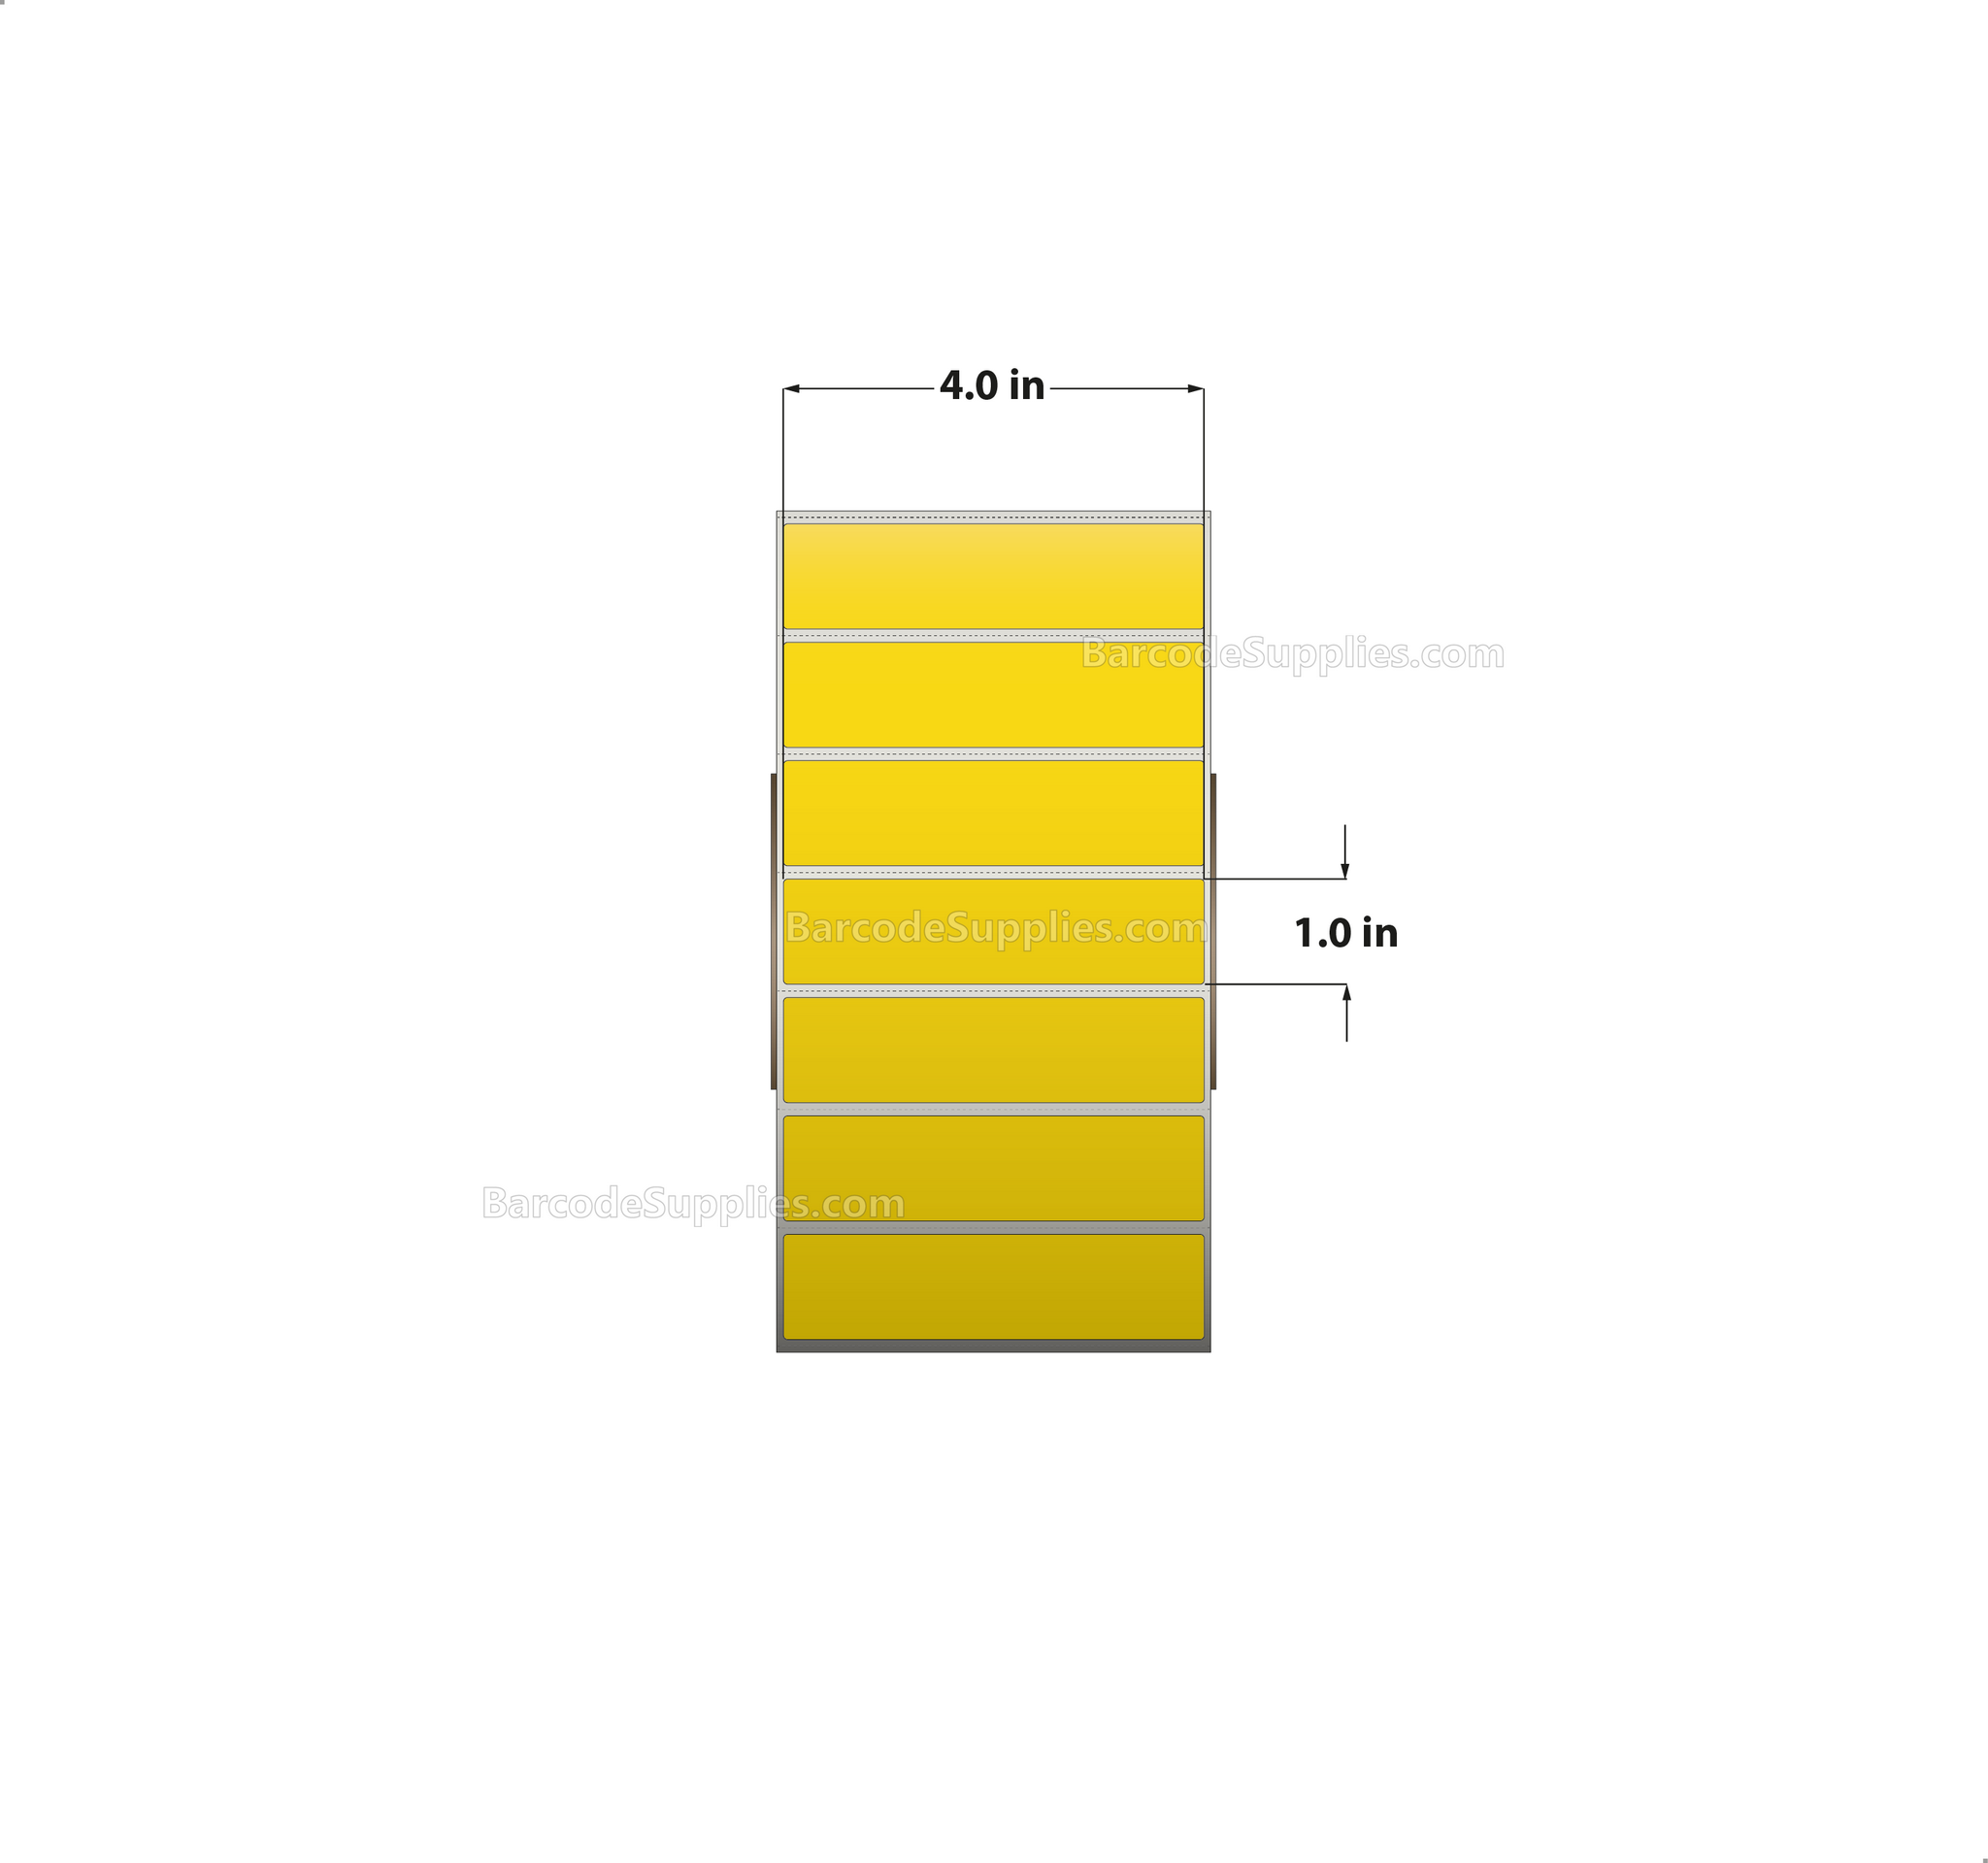 4 x 1 Thermal Transfer Pantone Yellow Labels With Permanent Adhesive - Perforated - 5500 Labels Per Roll - Carton Of 4 Rolls - 22000 Labels Total - MPN: RFC-4-1-5500-YL